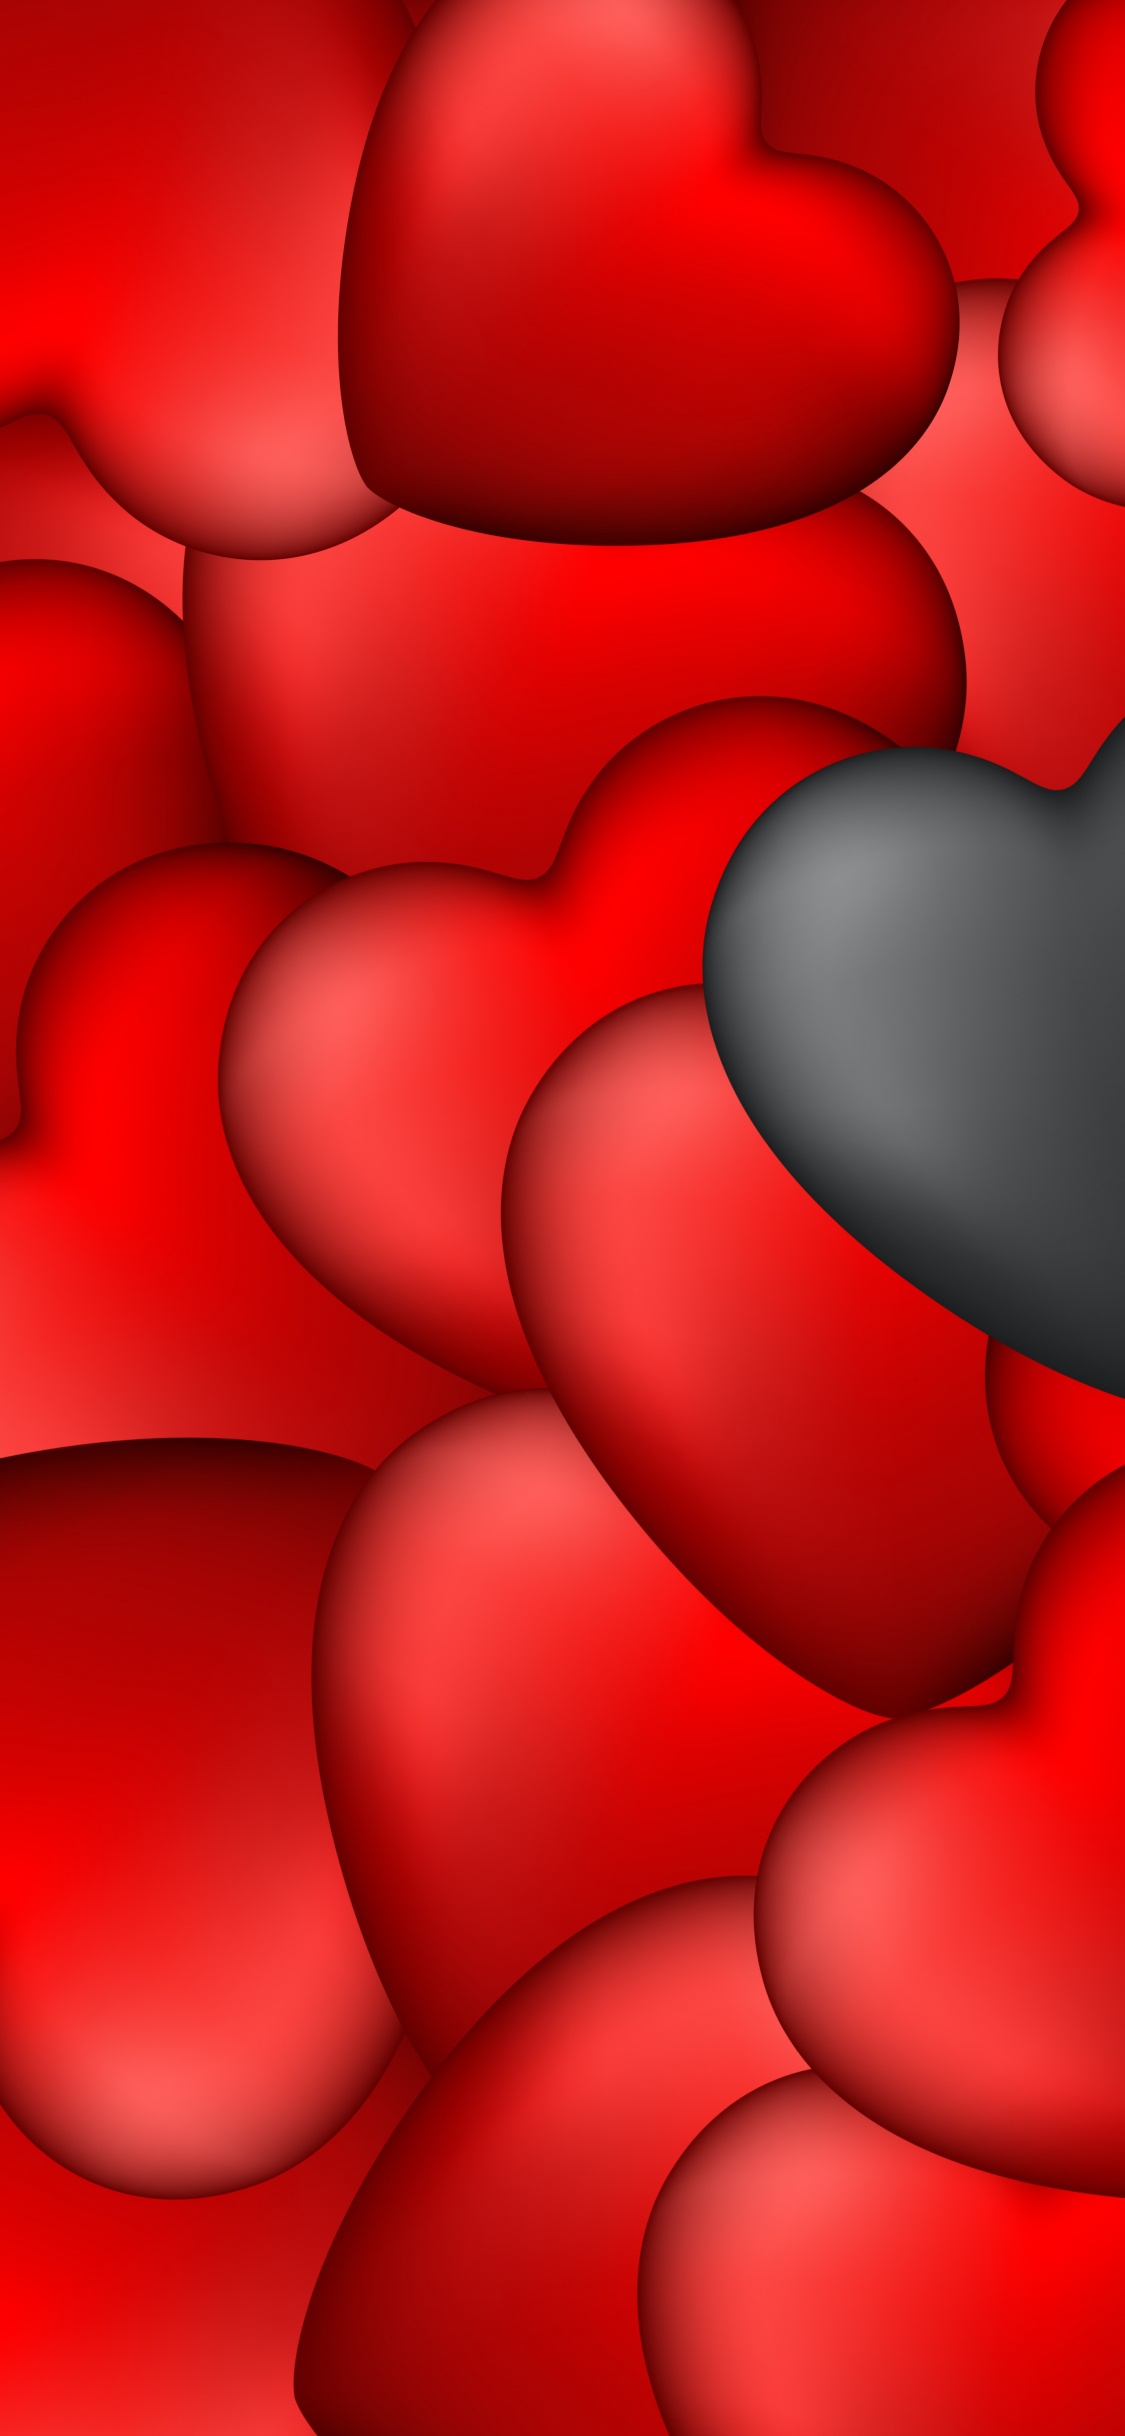 Heart, Black, Red, Valentines Day, Petal. Wallpaper in 1125x2436 Resolution